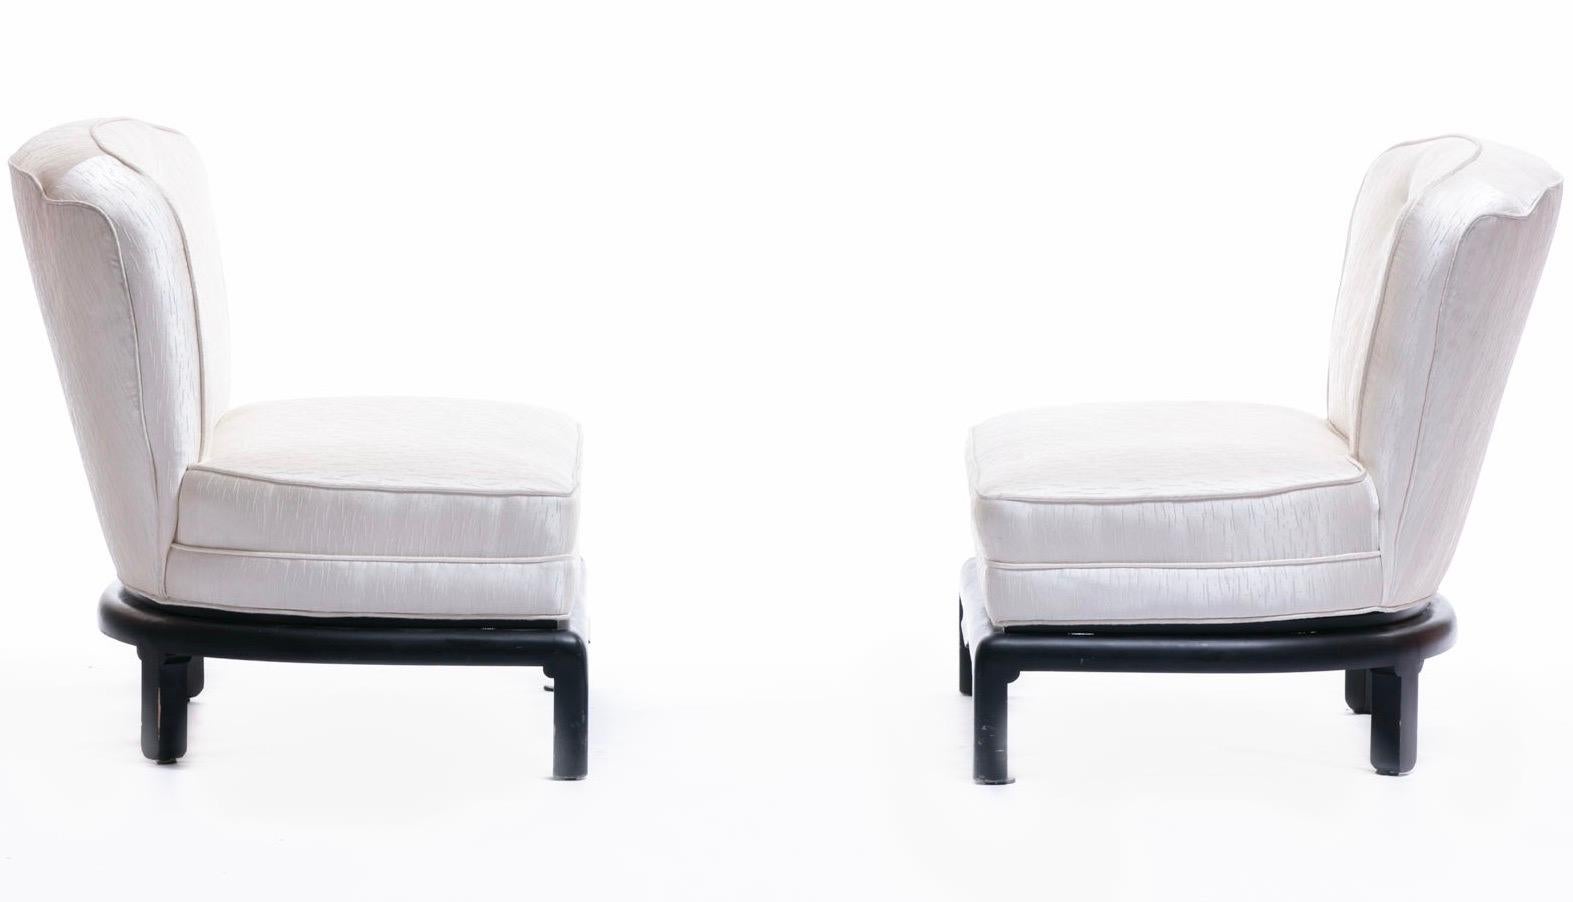 Lacquered Baker Ivory Satin Slipper Chairs Attributed to Michael Taylor, circa 1950s, Pair For Sale